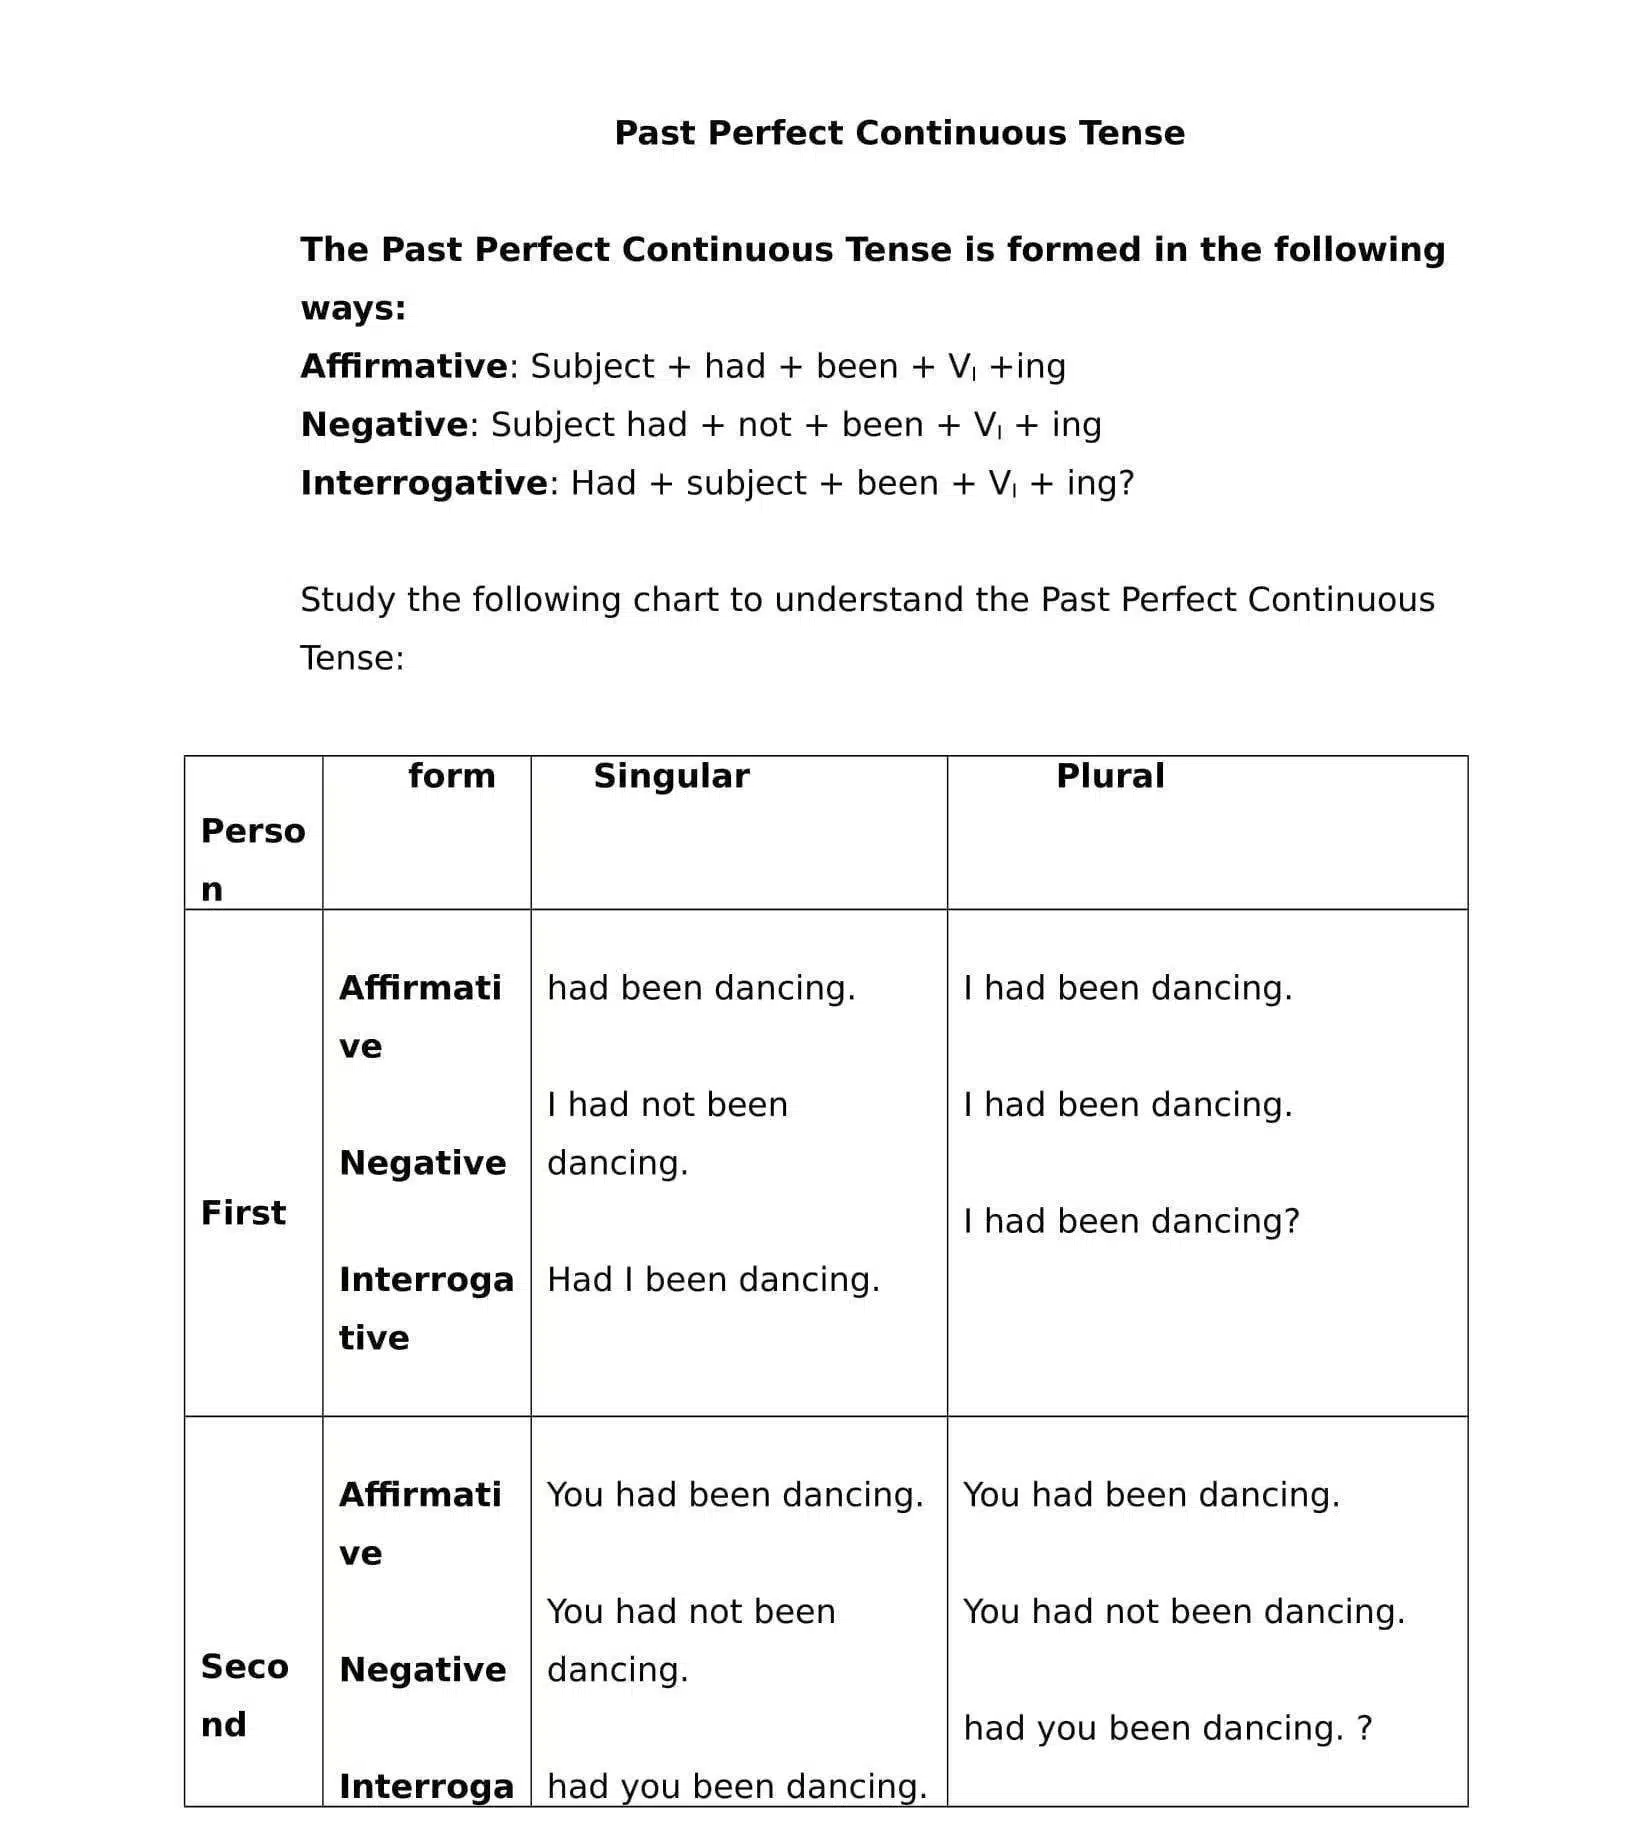 4.Past Perfect Continuous Tense 1